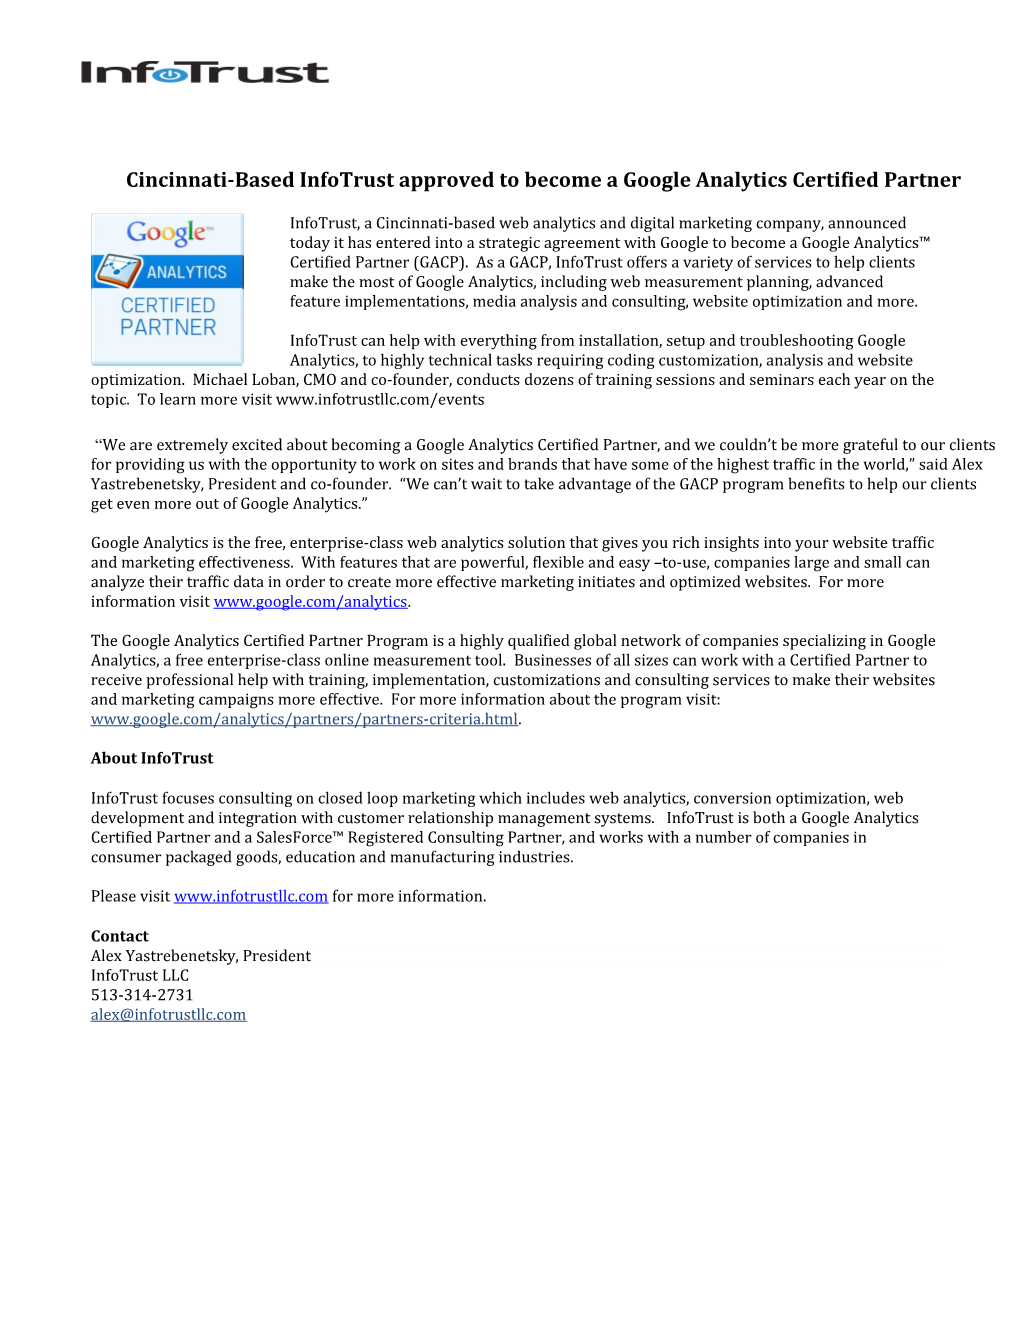 Cincinnati-Based Infotrust Approved to Become a Google Analytics Certified Partner